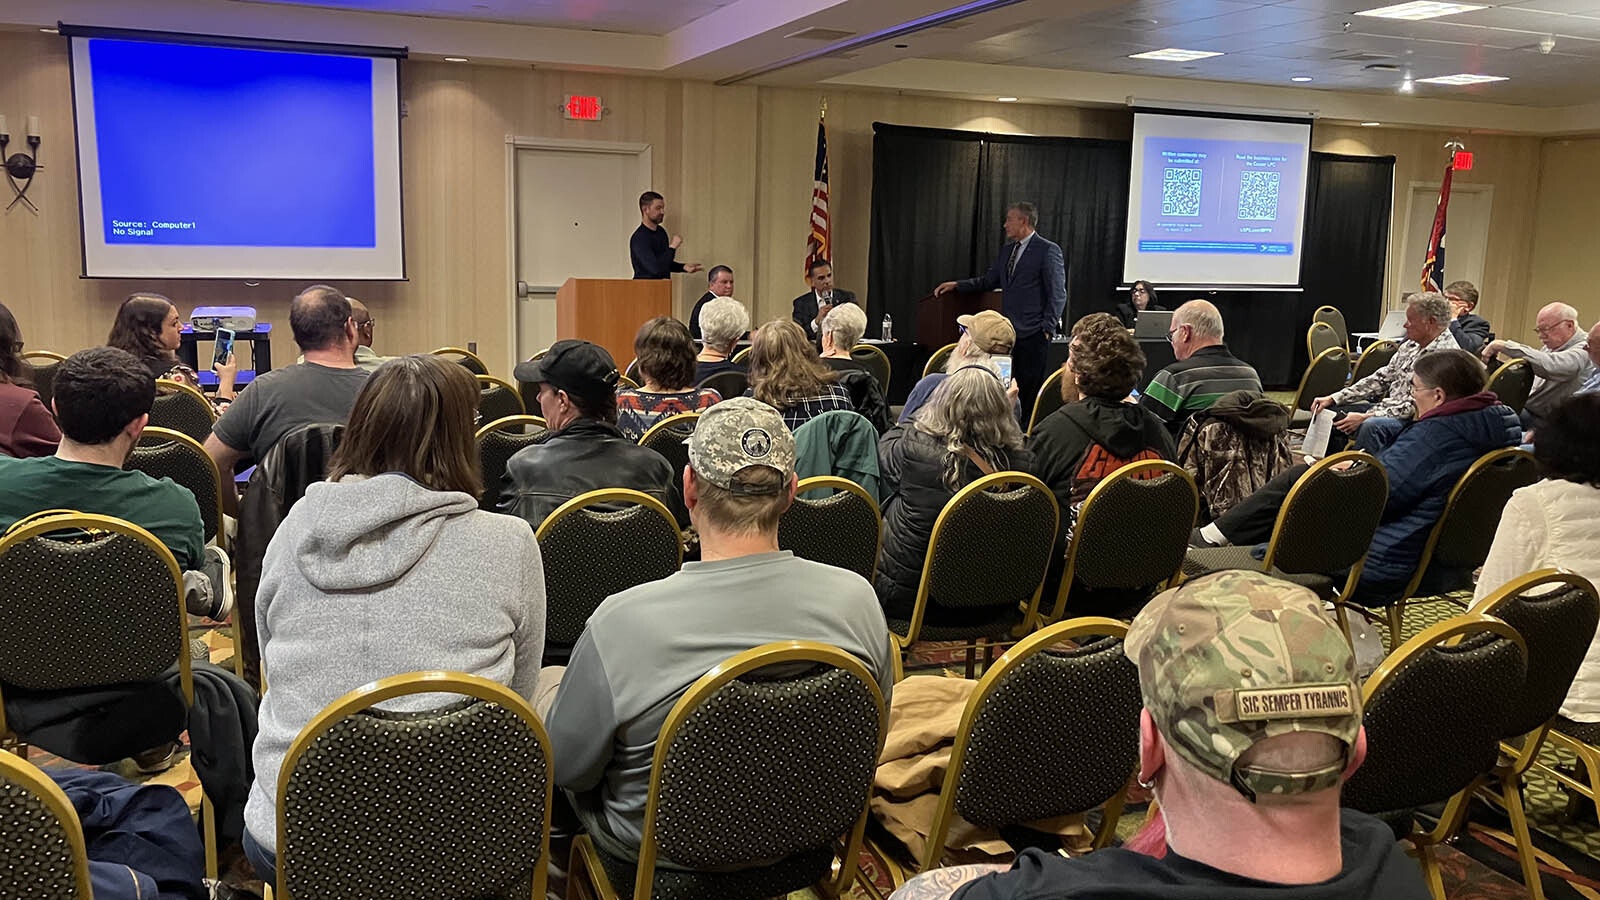 A hearing on proposed changes to the U.S. Postal Service’s Casper Processing and Distribution Center drew a full crowd at a north-side Casper hotel on Wednesday.